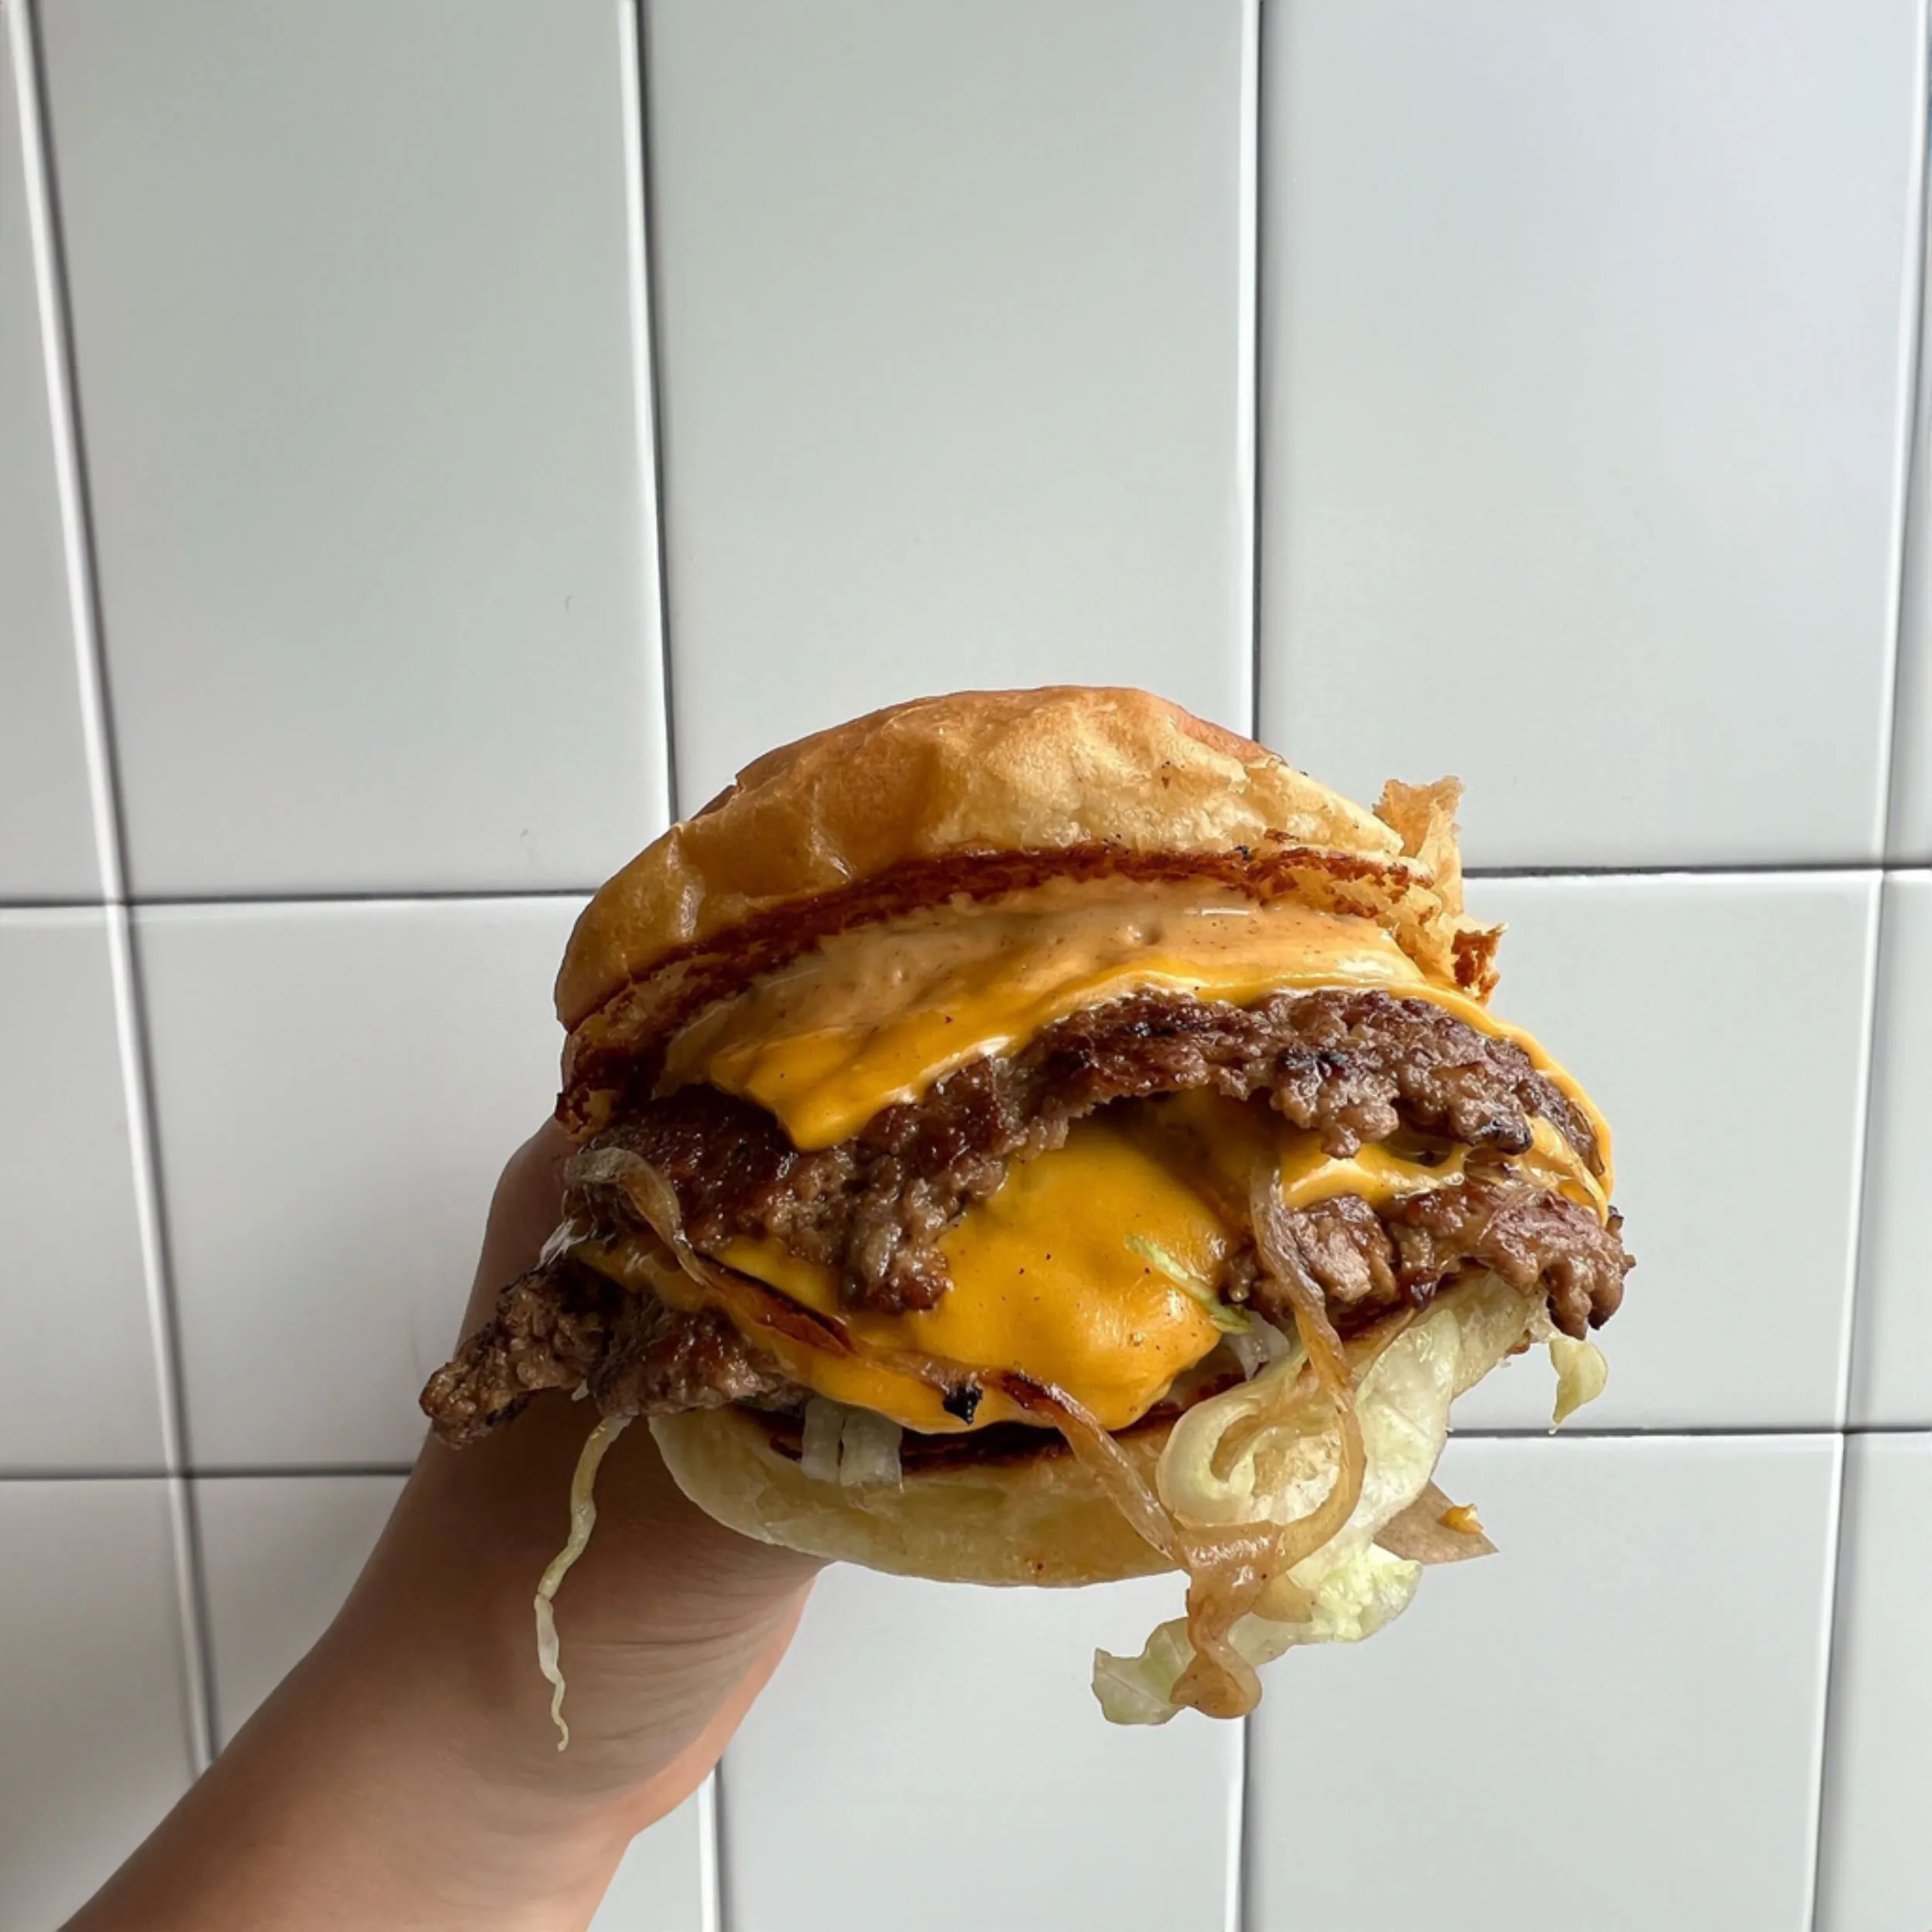 Photograph of burger from Blue Eyes